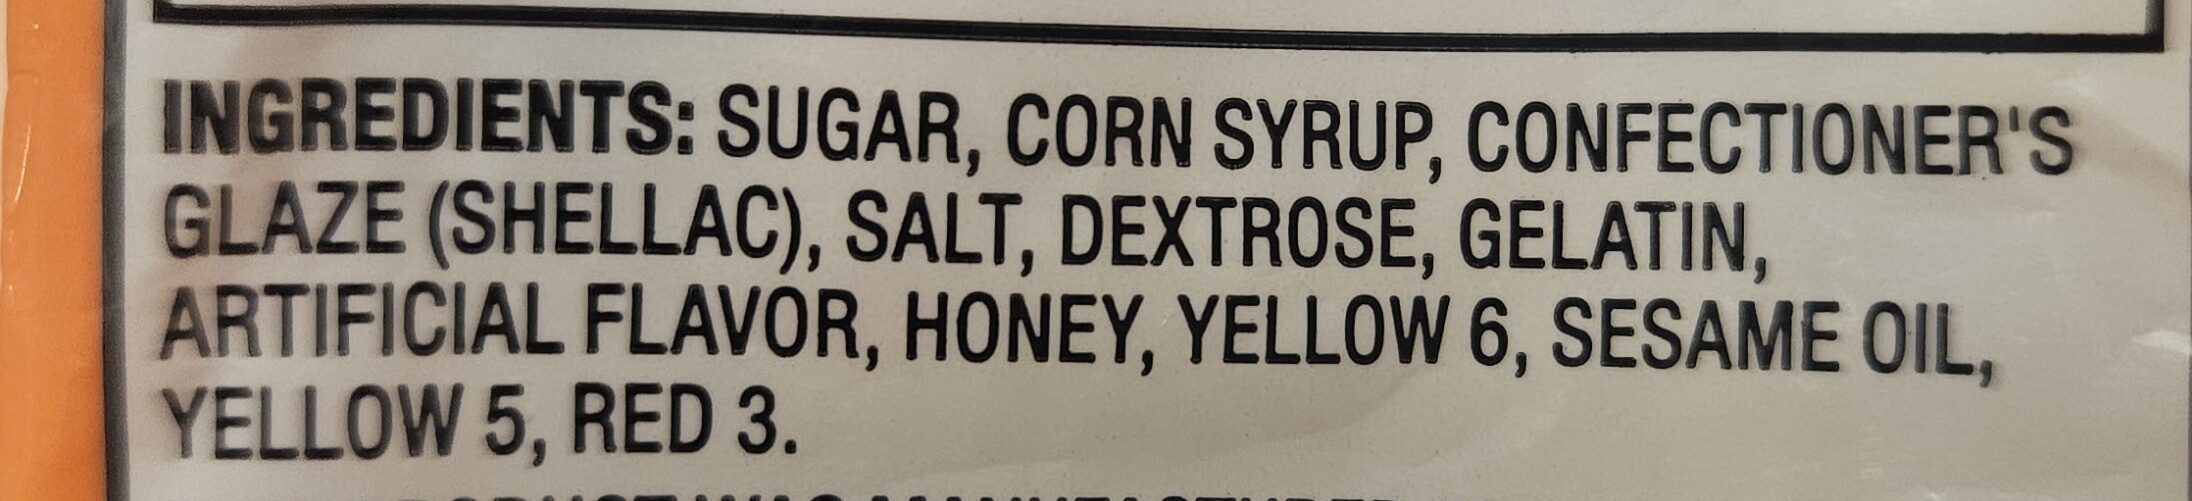 Candy corn - Ingredients